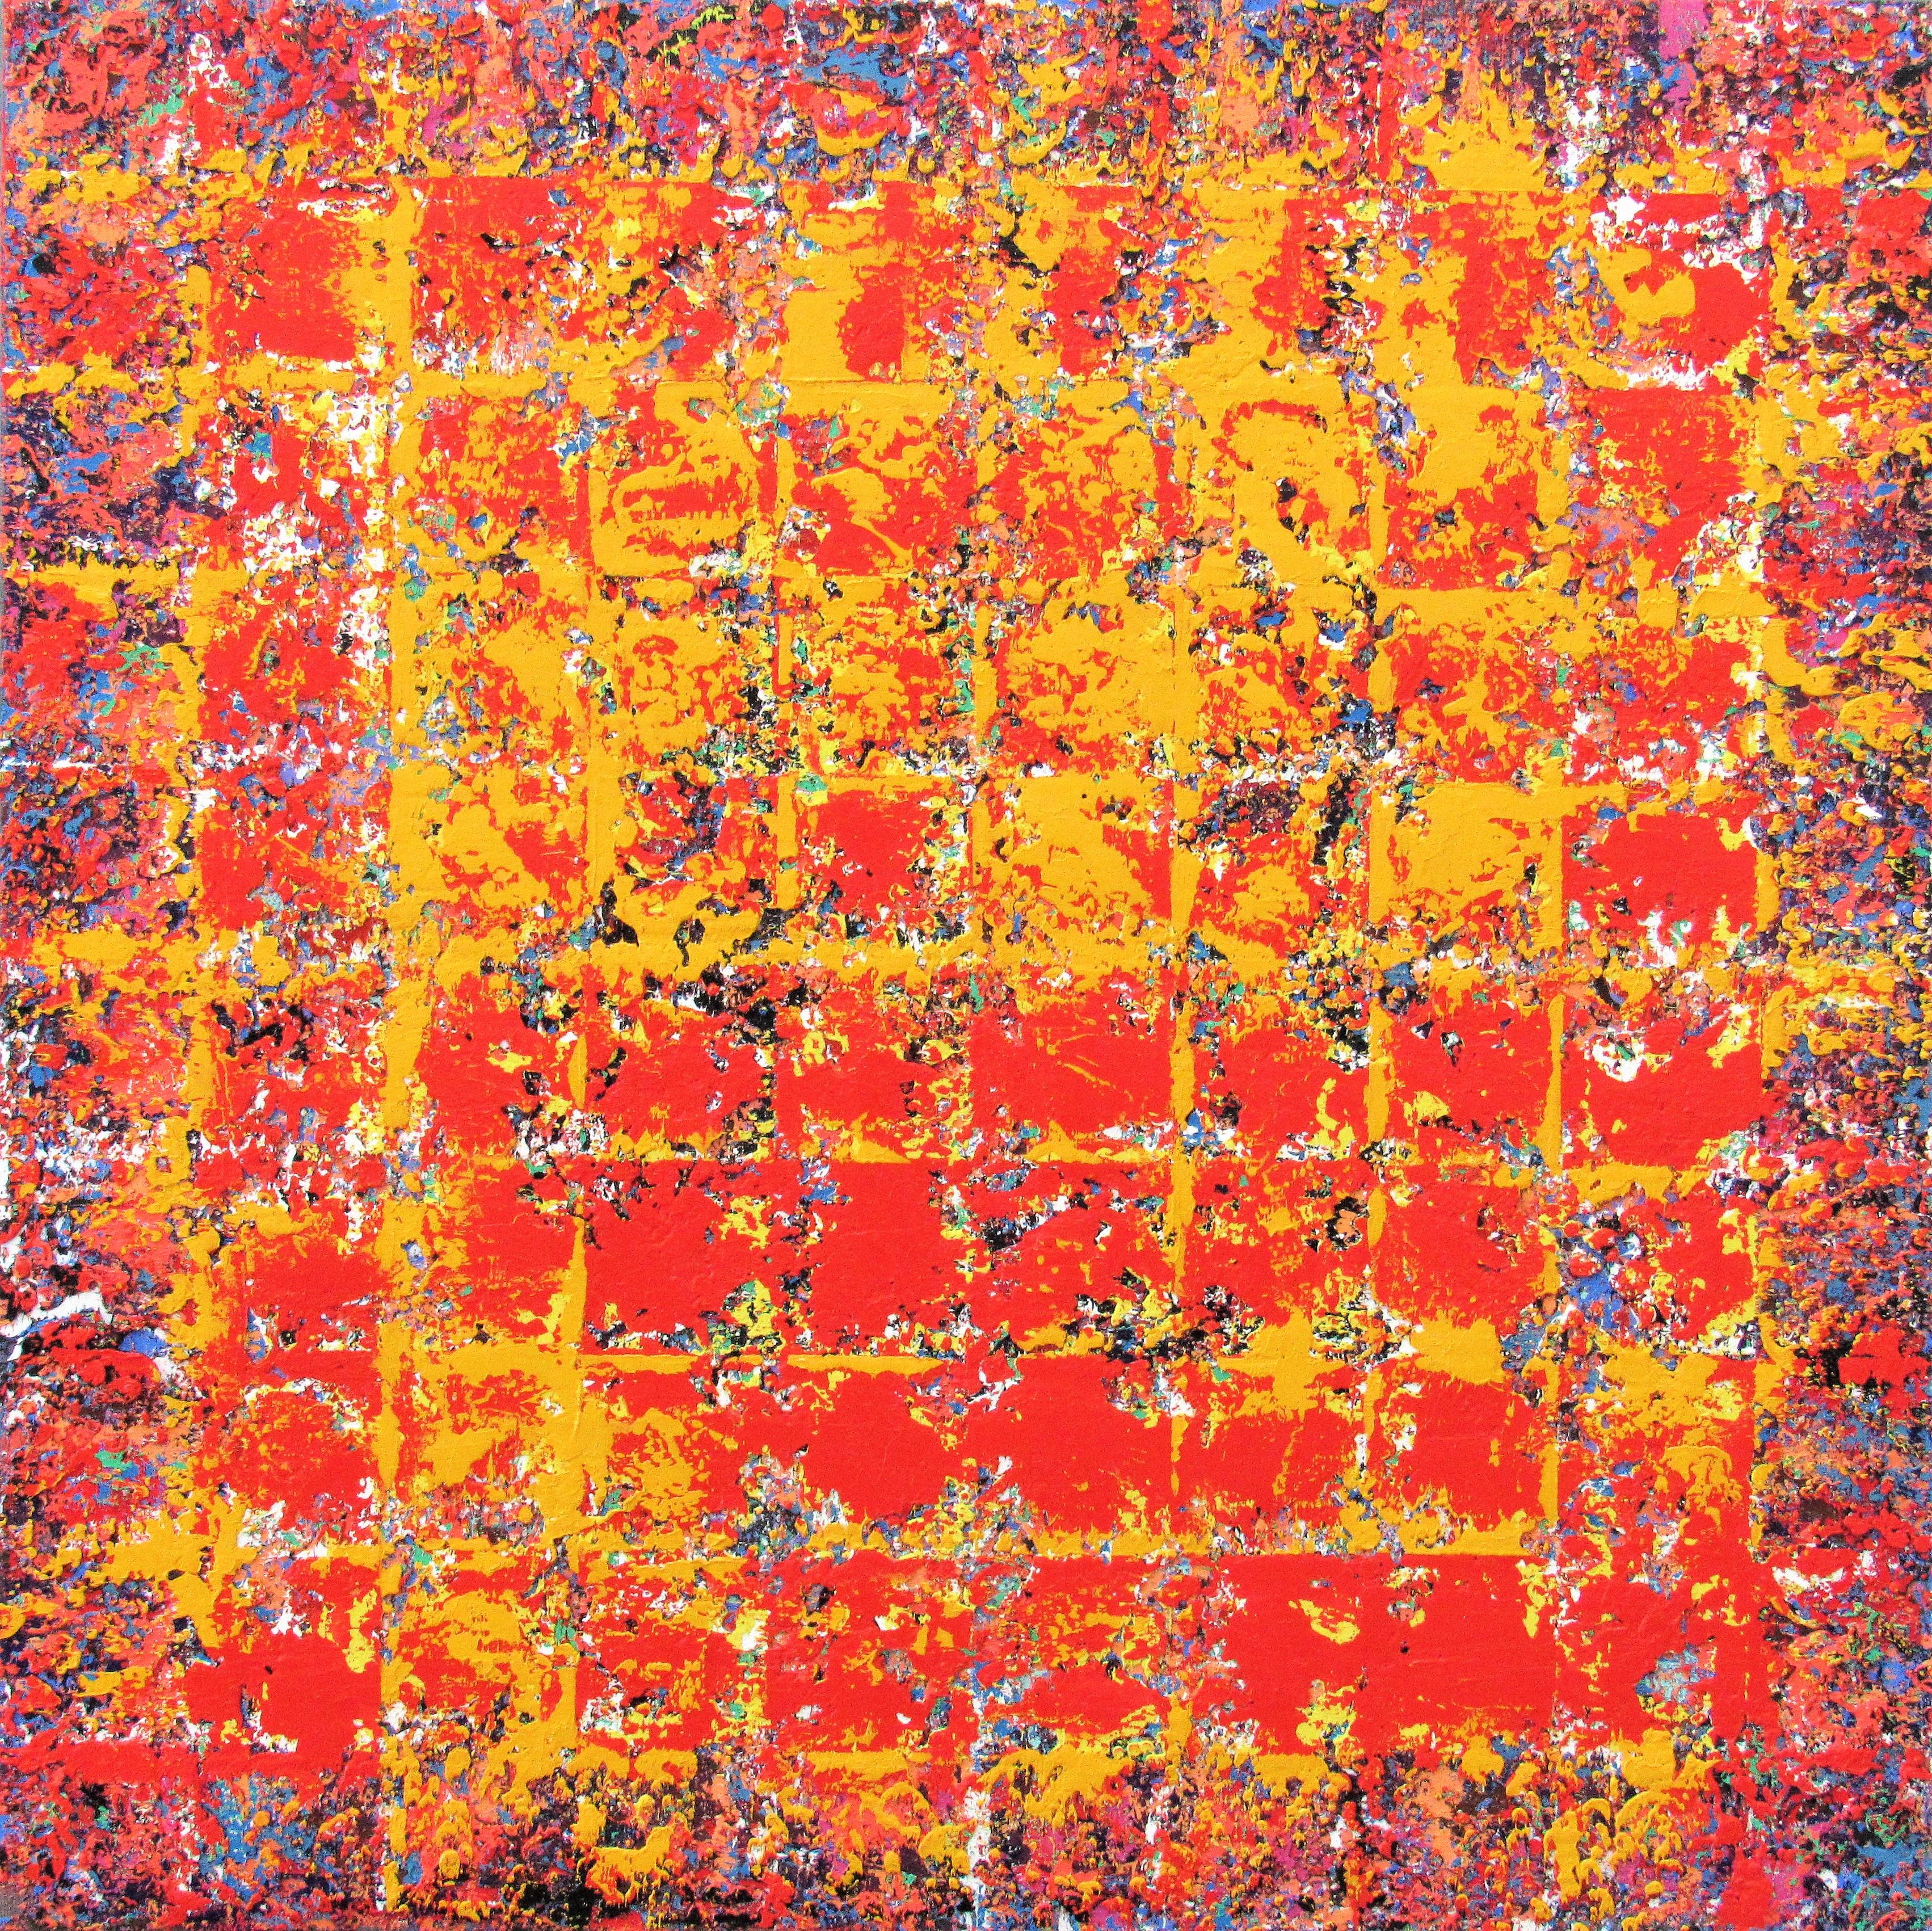 Lament - geometric, abstract, colourful, strong, bold, squares, rectangles  - Painting by Brian Neish